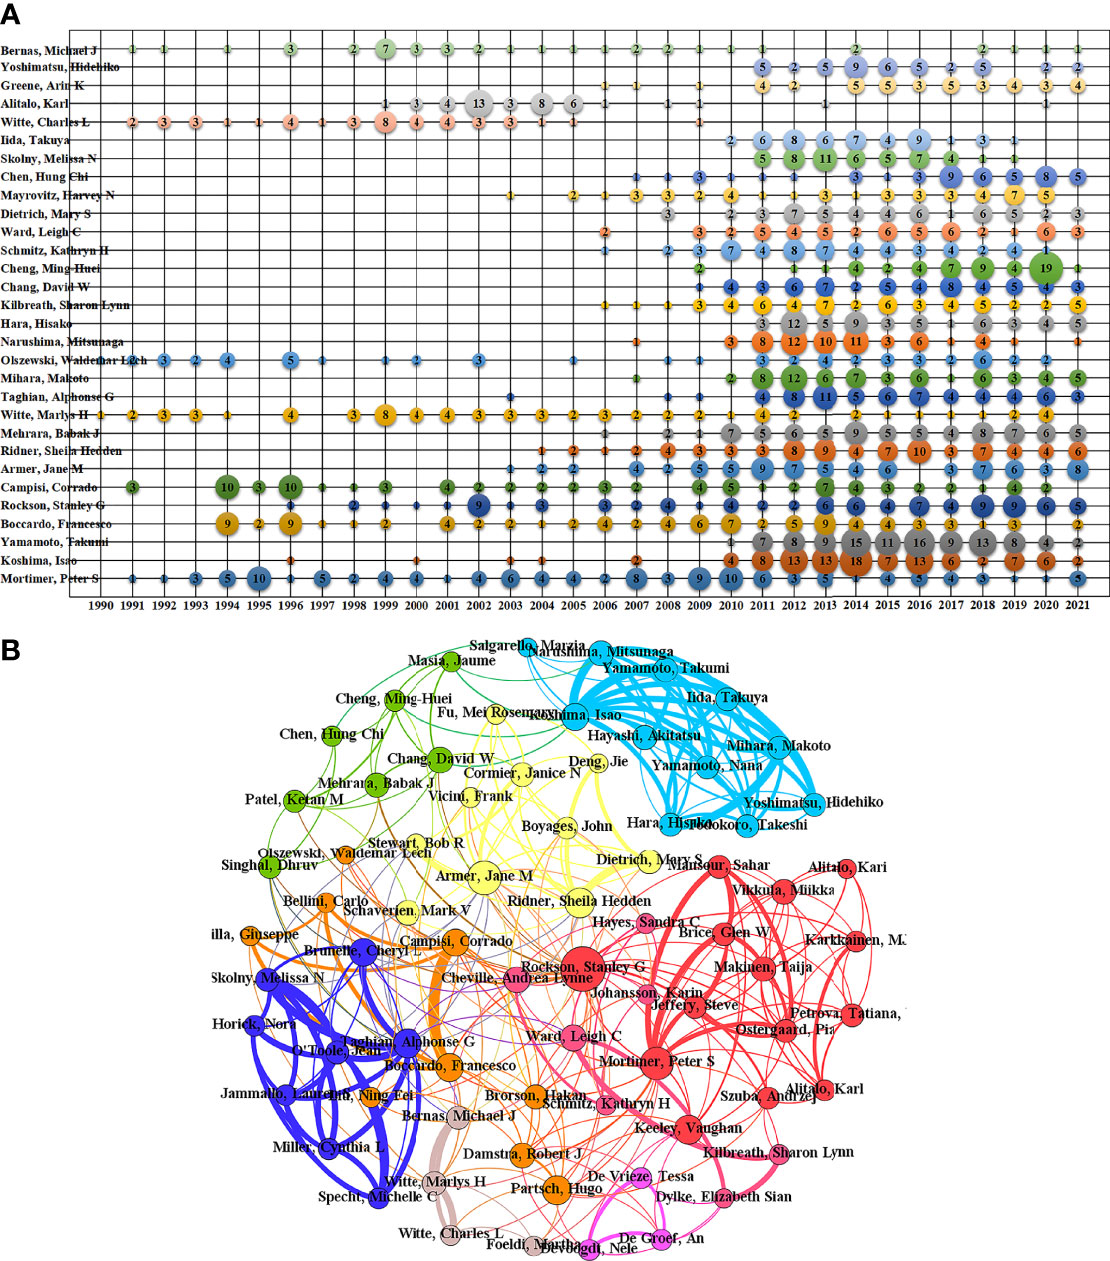 Frontiers | Visual analysis of global research output of